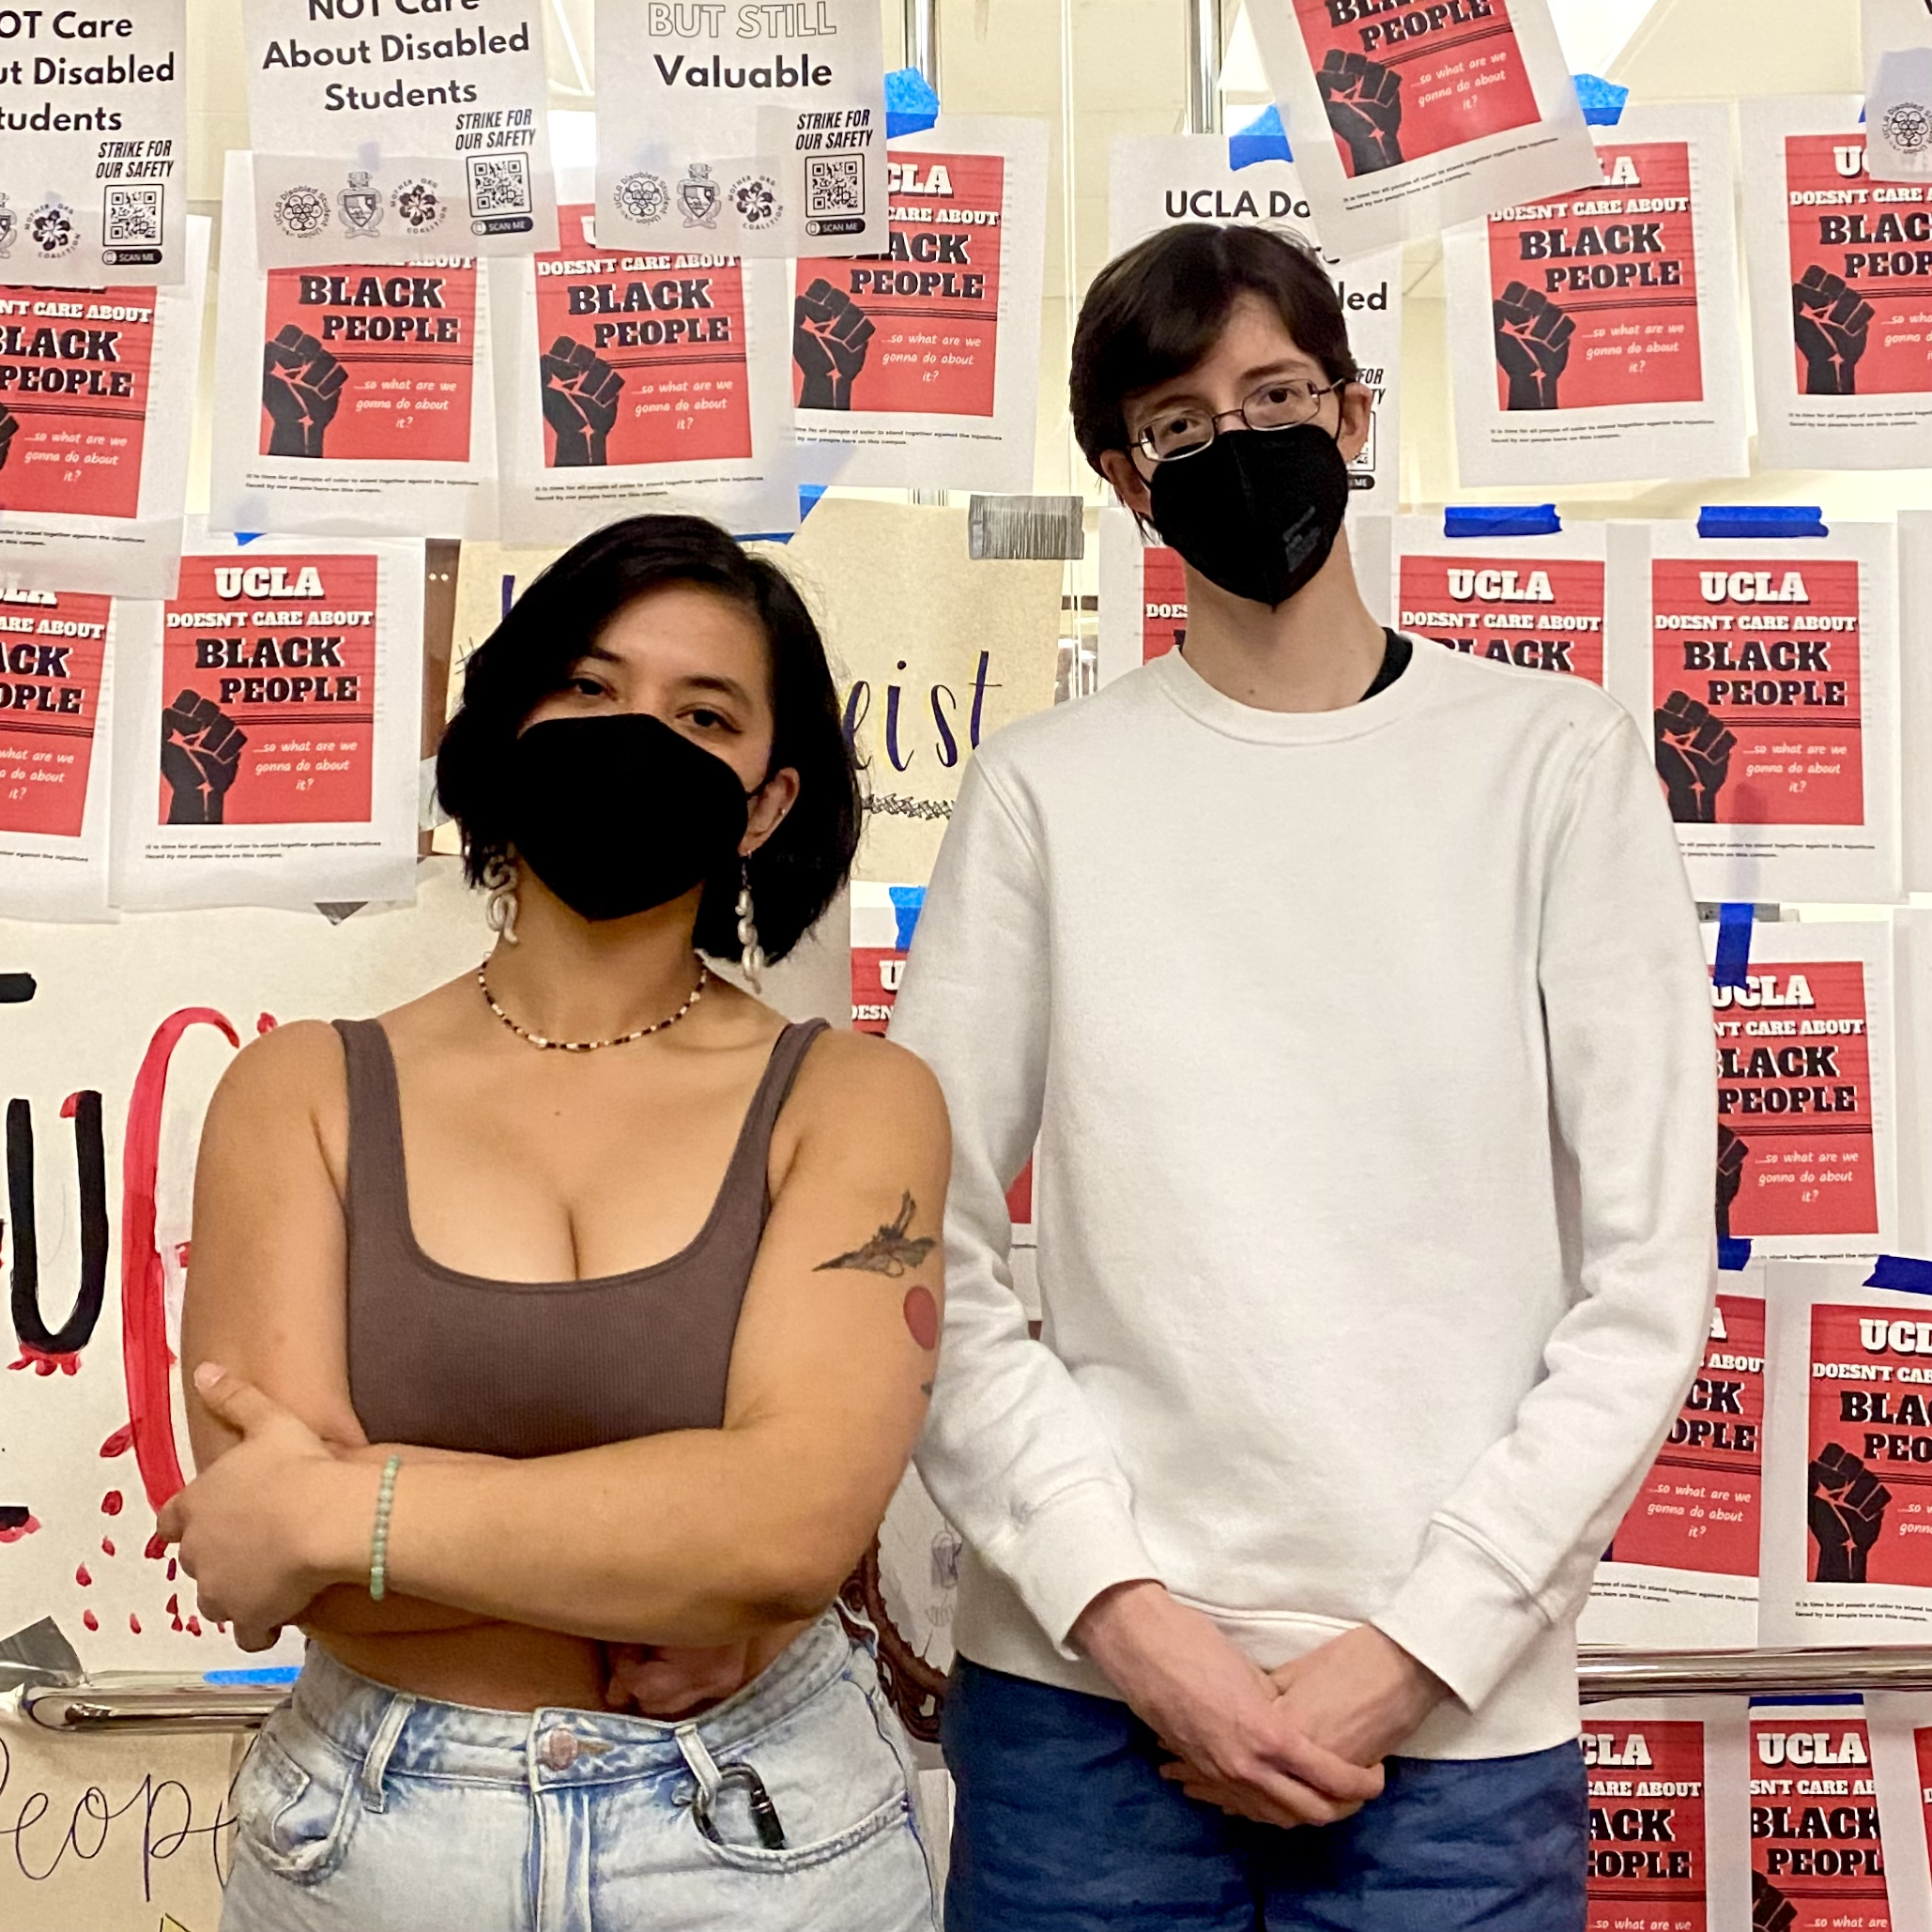 Photo of Quinn (left) and Christopher (right) standing with stern expressions in front of the UCLA Chancellor’s Office doors plastered with flyers and posters with anti-racist and pro-disabled messages. Quinn is a Brown genderfluid person with chin length dark hair, a black KN95 mask, a gold necklace and matching dangly earrings, a rose tattoo, and a brown tank top tucked into light-wash jeans. Christopher is a white genderqueer man with short brown hair, small-framed glasses, a black KN95 mask, a white crewneck sweater, and blue shorts. 